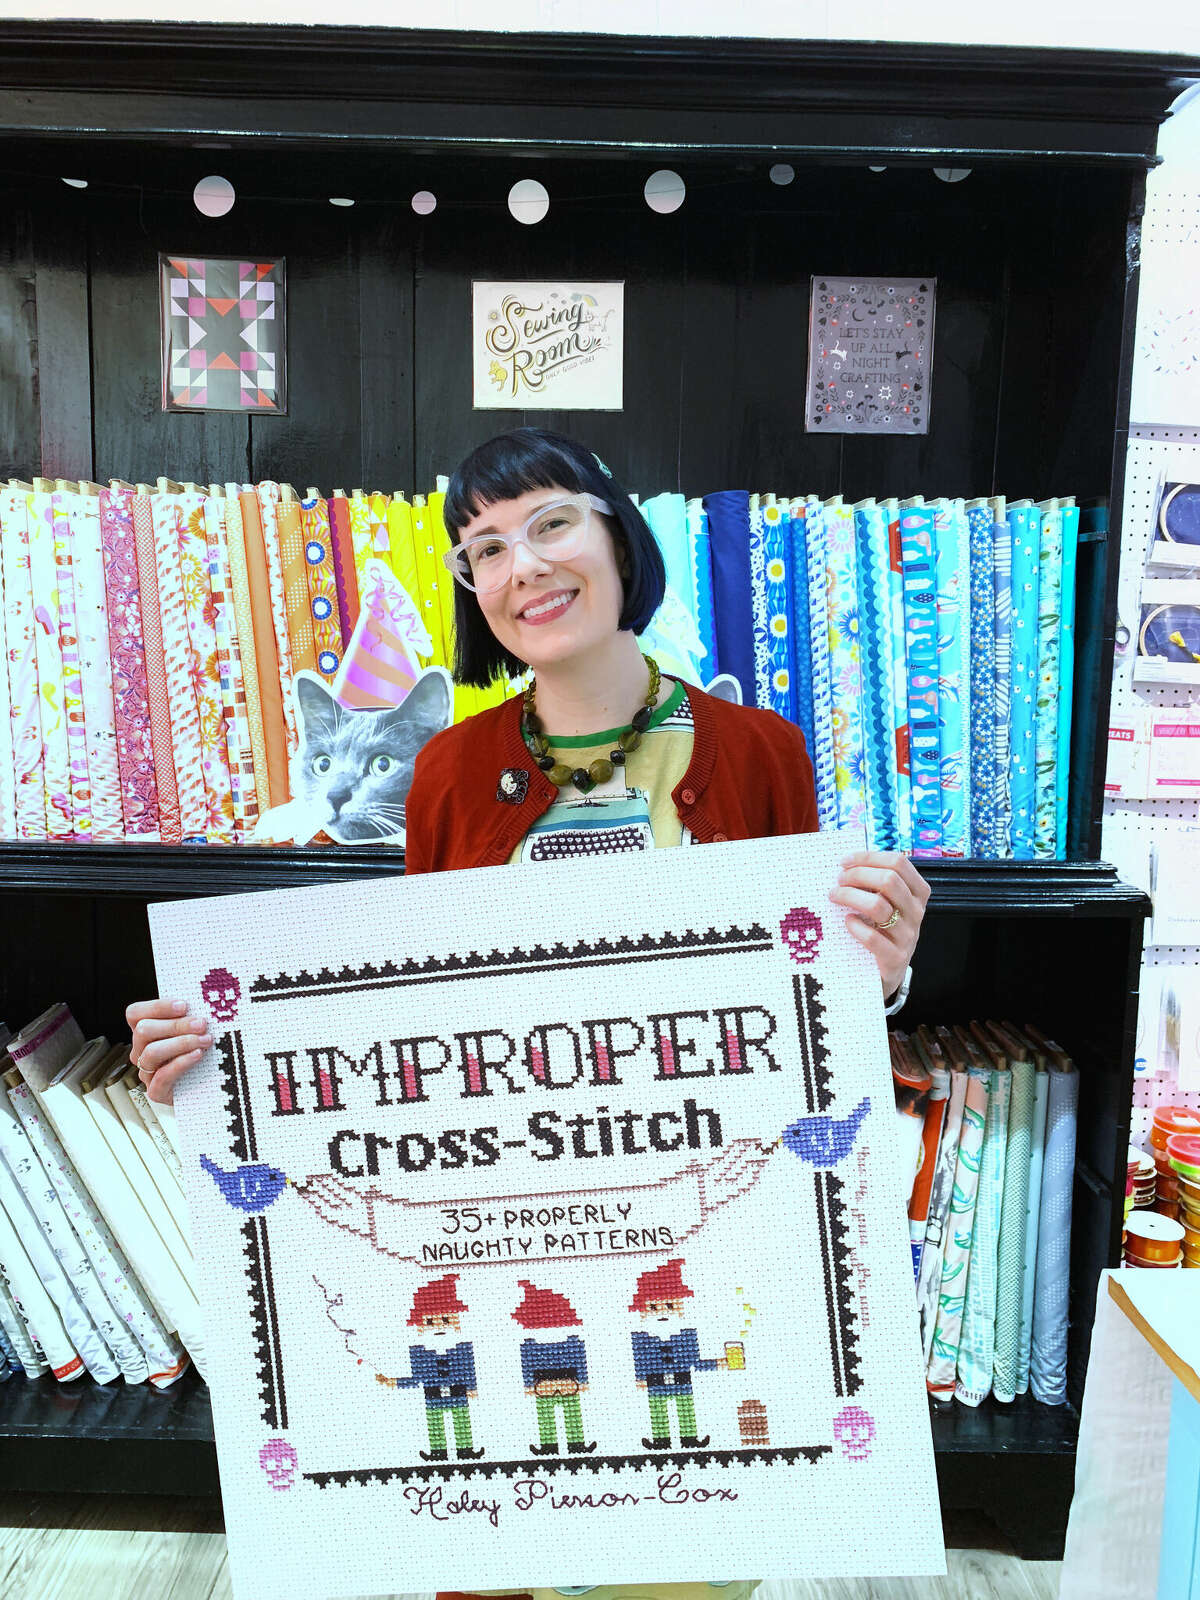 Author and needlecraft artist Haley Pierson-Cox creates all sorts of cross-stitch designs that include irreverent spins on classic patterns. One of her first books was "Improper Cross-Stitch," which includes an Art Deco-inspired version of the F-word.